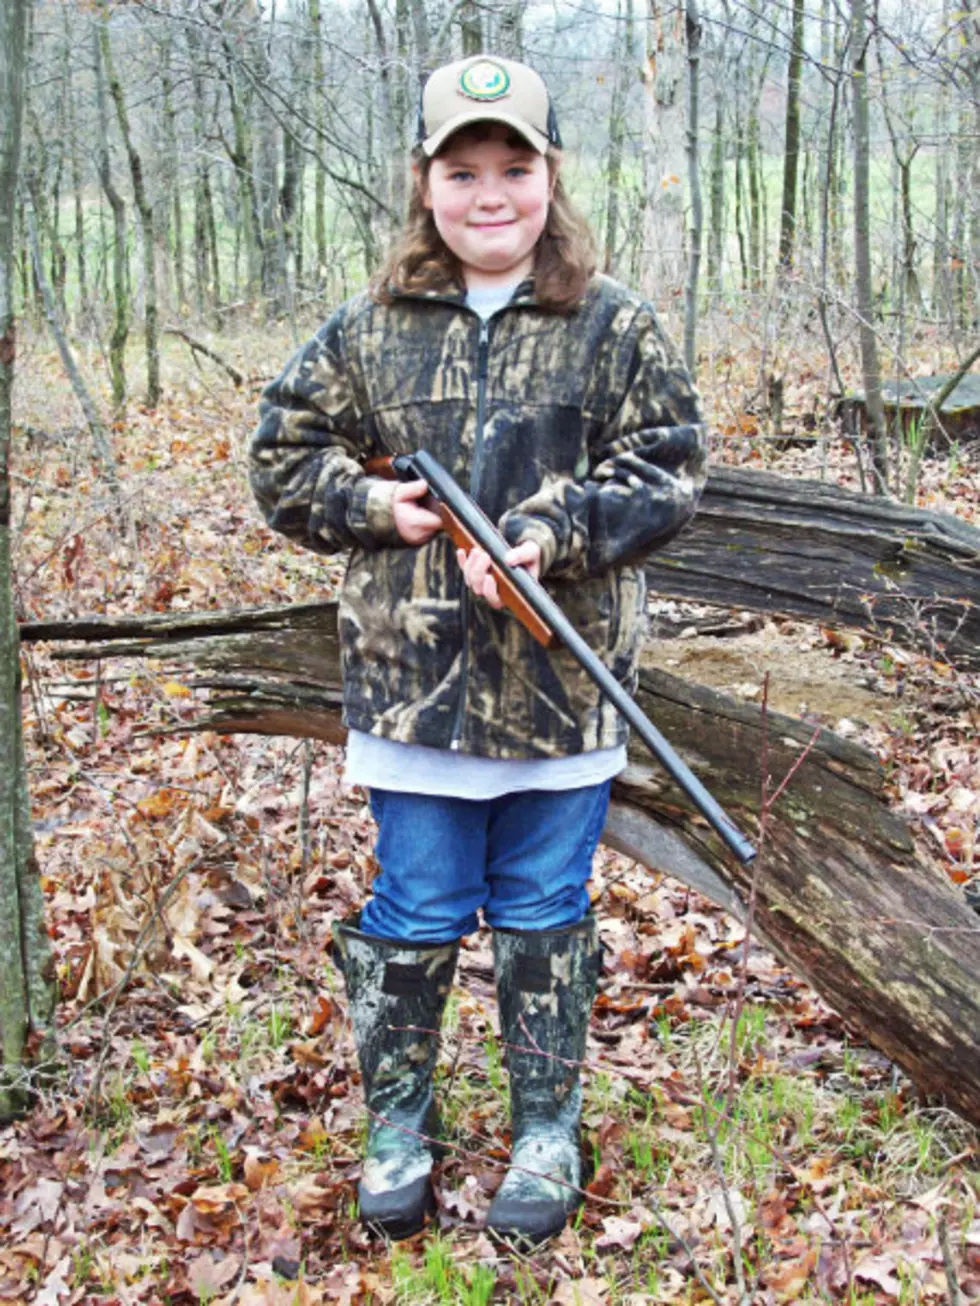 Rabbit &#038; Squirrel Derby Gets Kids Out Hunting